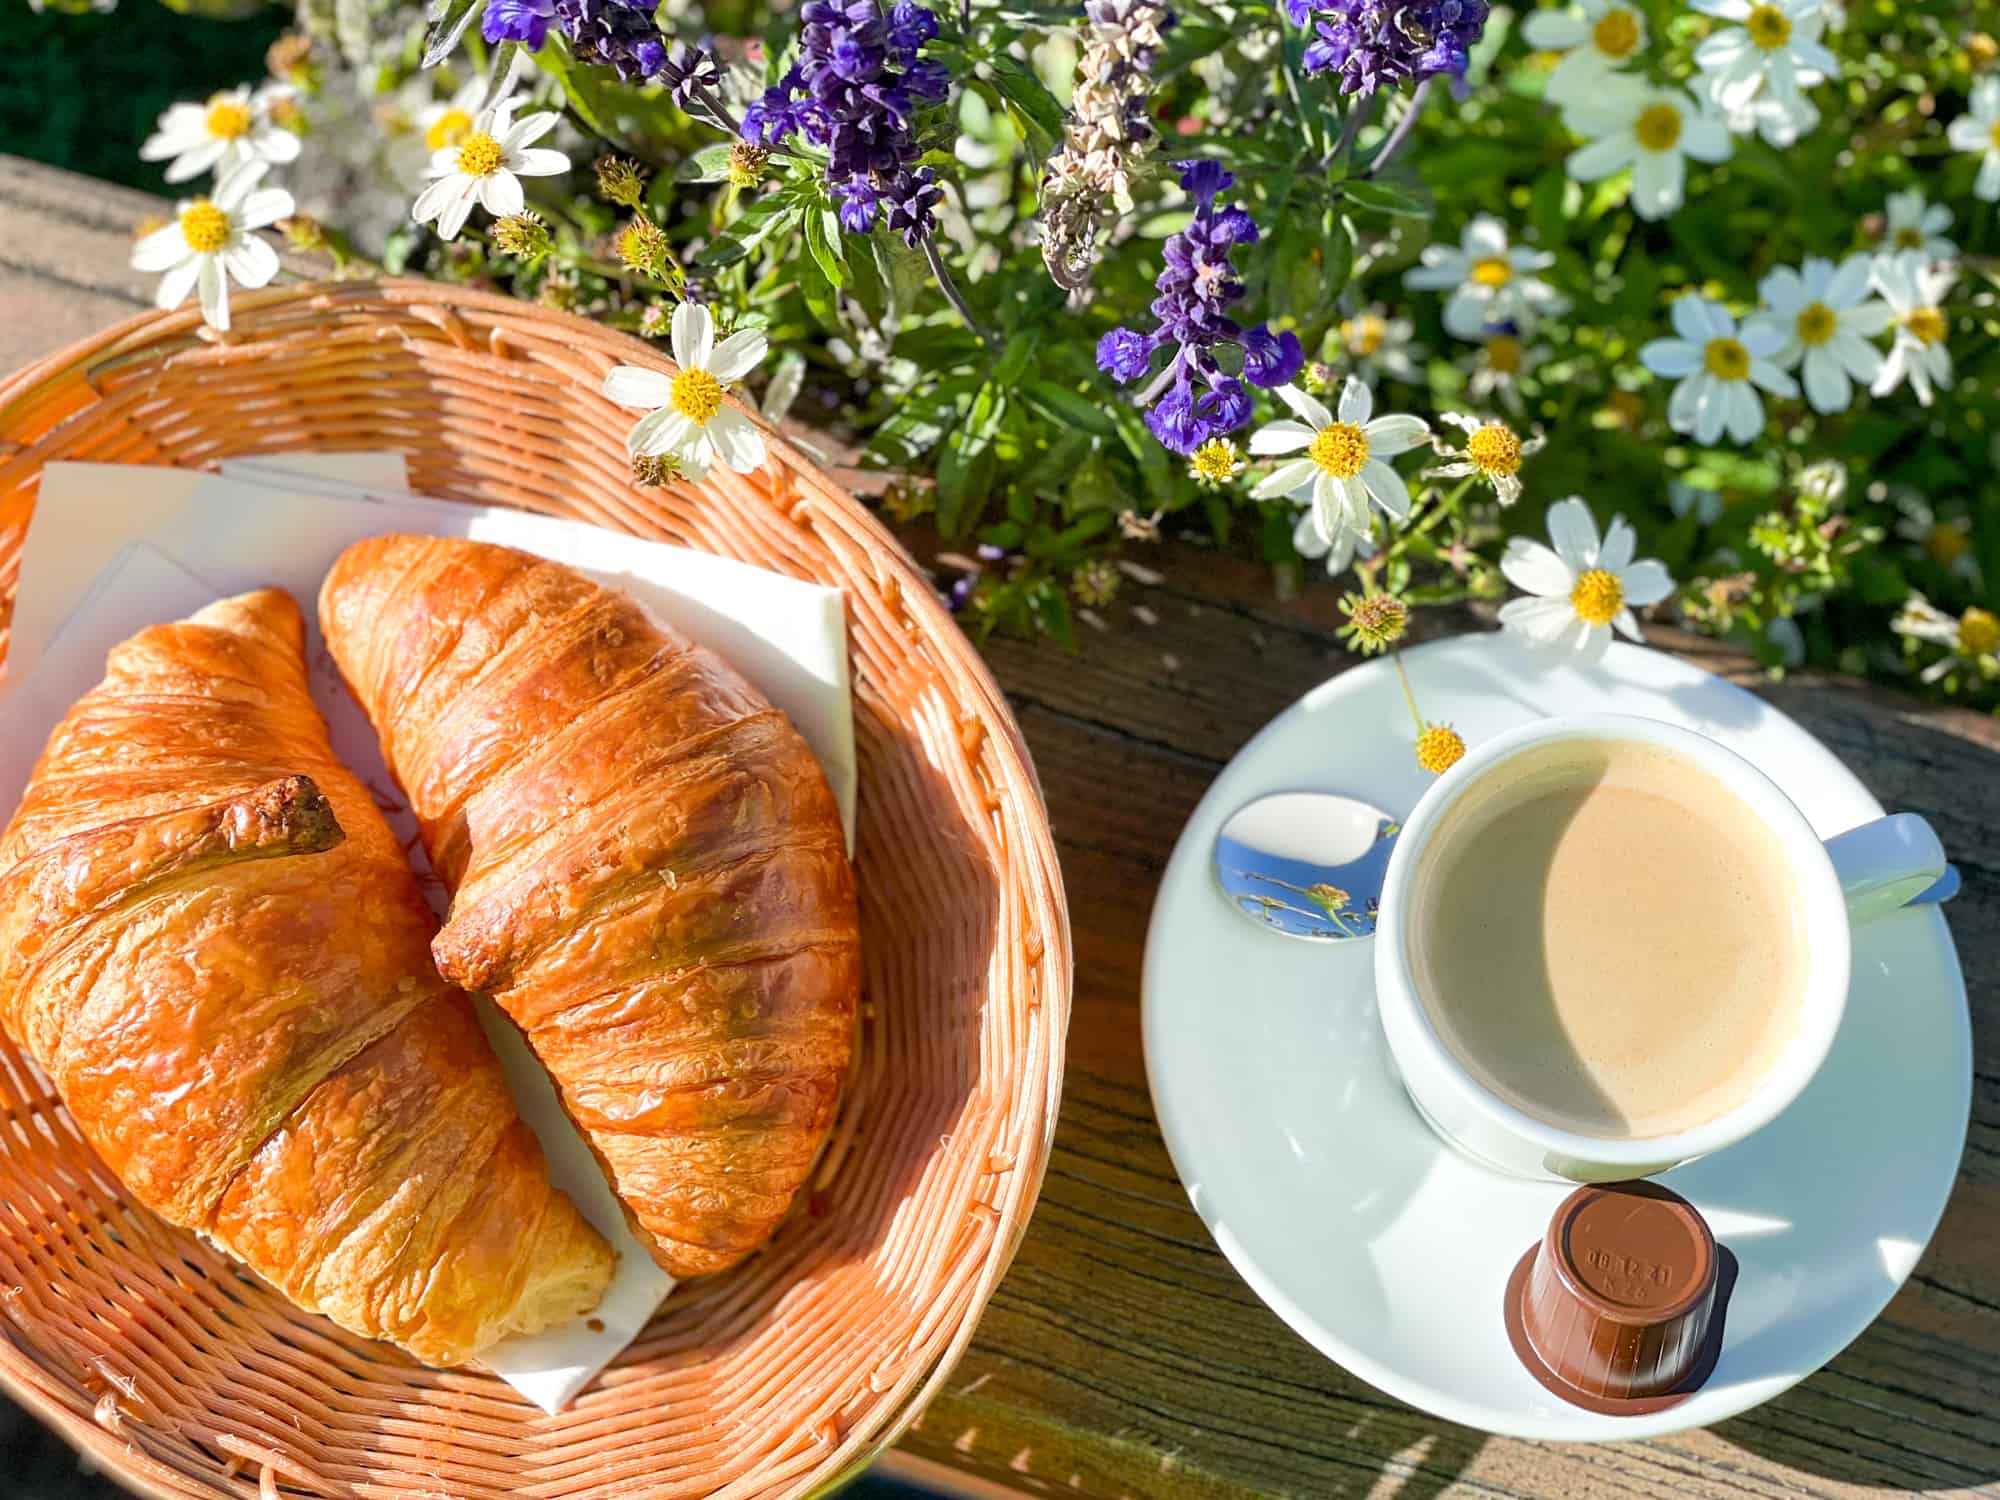 Summer in Switzerland coffee and croissant with flowers outside